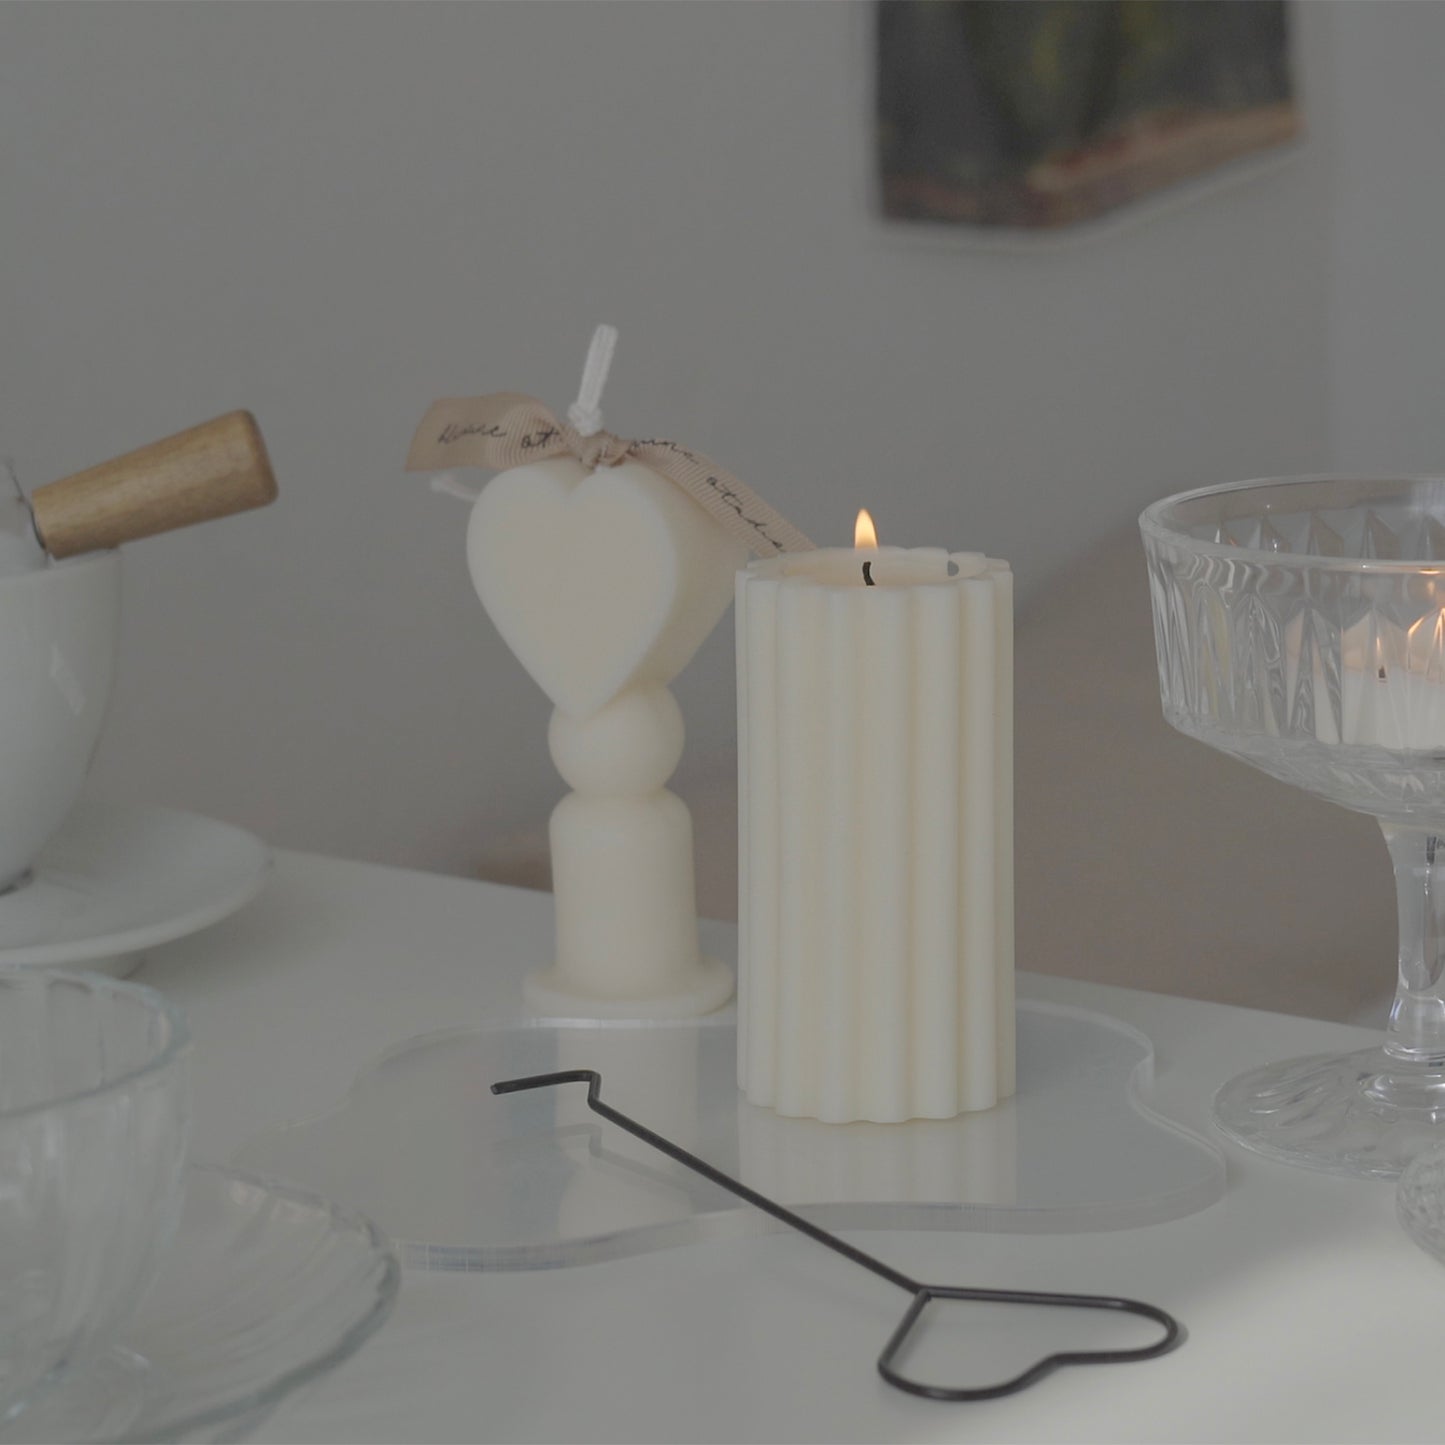 Heart shape candle, a burning ribbed pillar candle on a clear irregular shape acrylic coaster with a black metal heart shaped wick dipper, and a lit tealight candle in a glass coupe are placed on white drawer. The arrangement exudes minimal aesthetic dreamy vibes.